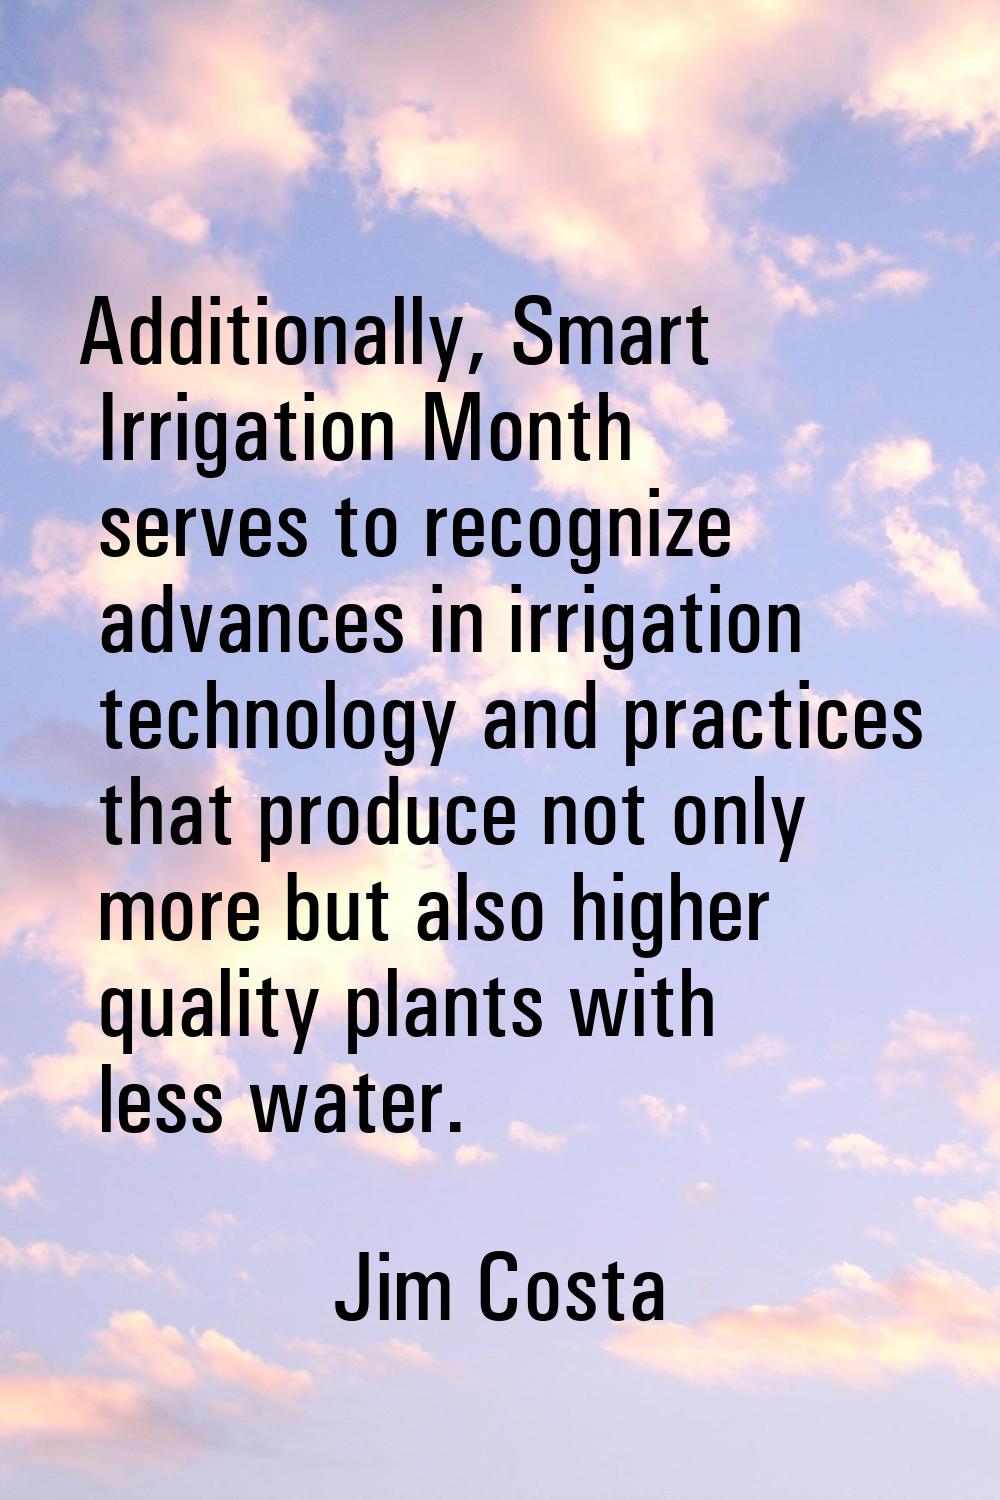 Additionally, Smart Irrigation Month serves to recognize advances in irrigation technology and prac